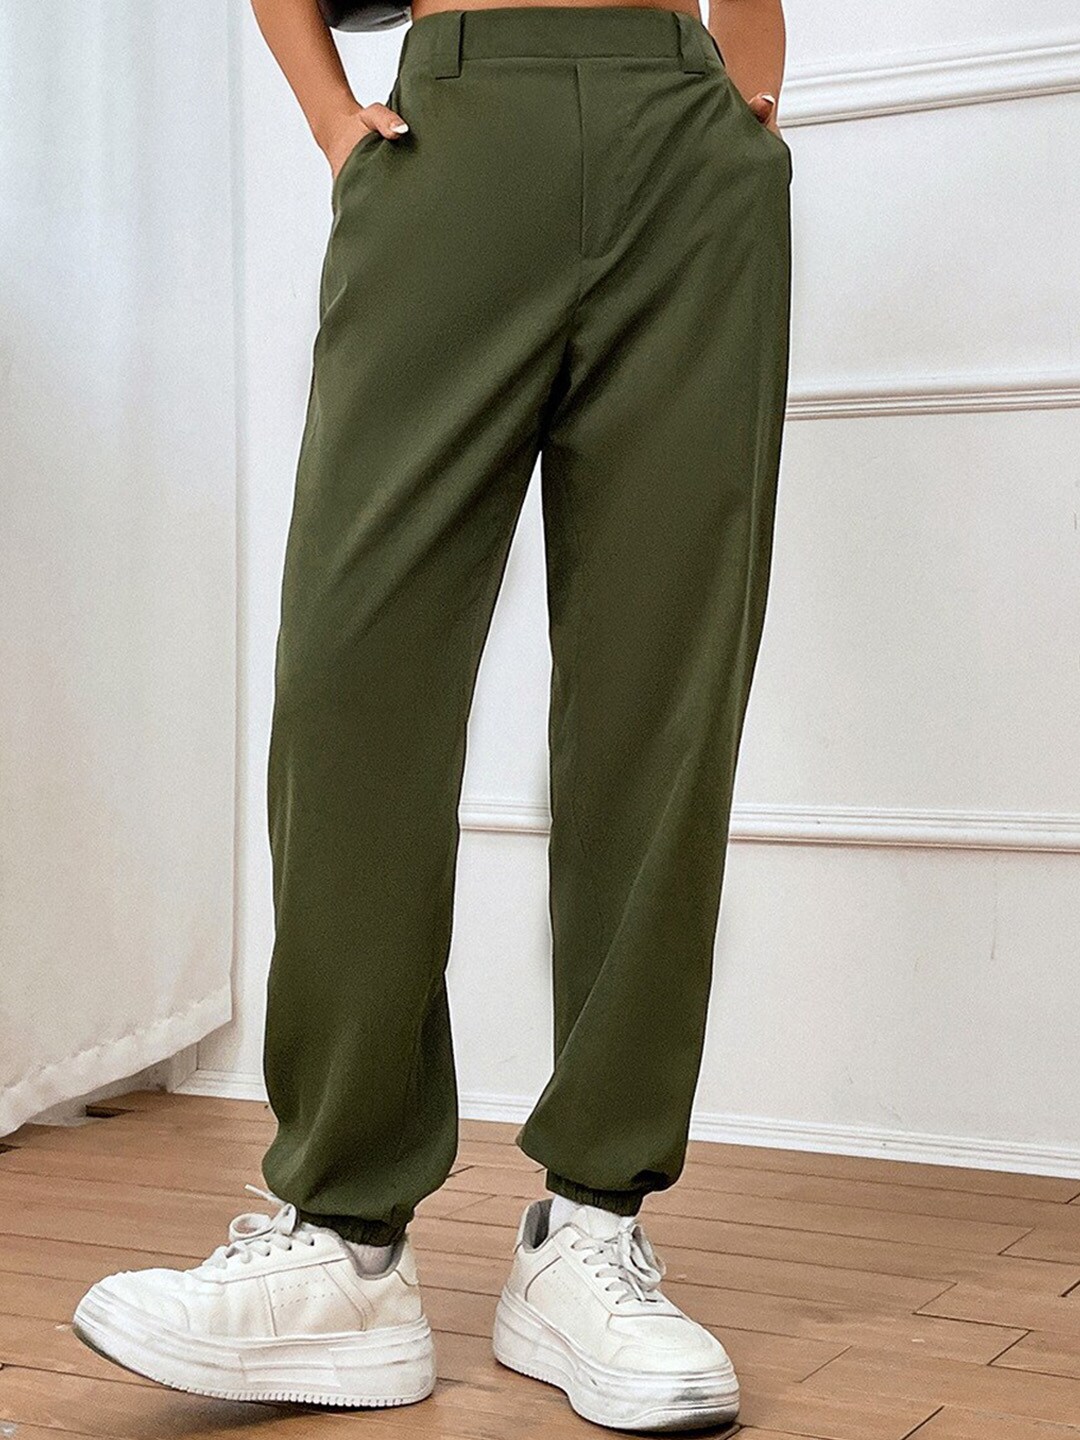 BoStreet Women Olive Green Tapered Fit Joggers Trousers Price in India